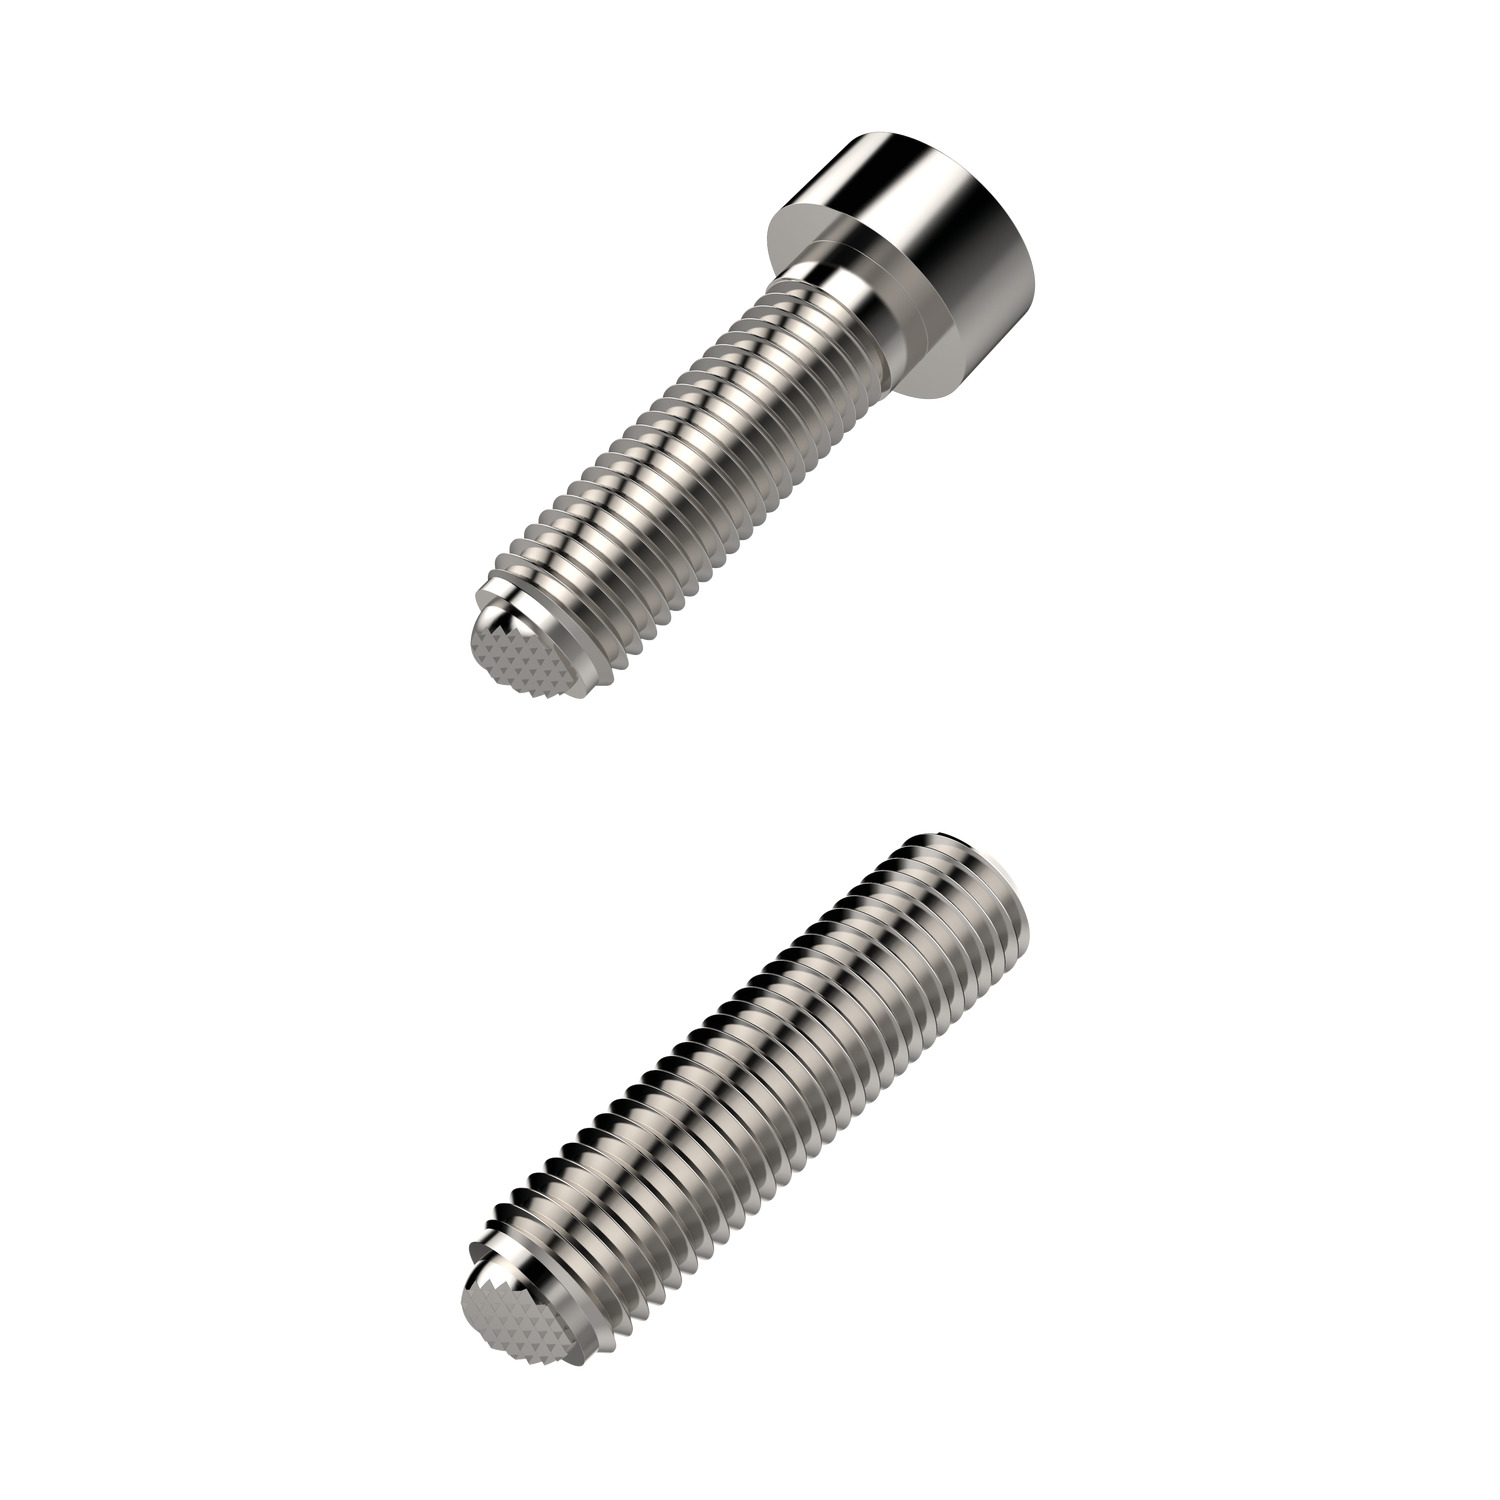 Thrust Screws - Stainless Headed and headless thrust screws in stainless steel and all balls come secured against full rotation. Standard sizes across range include M6 - M16.